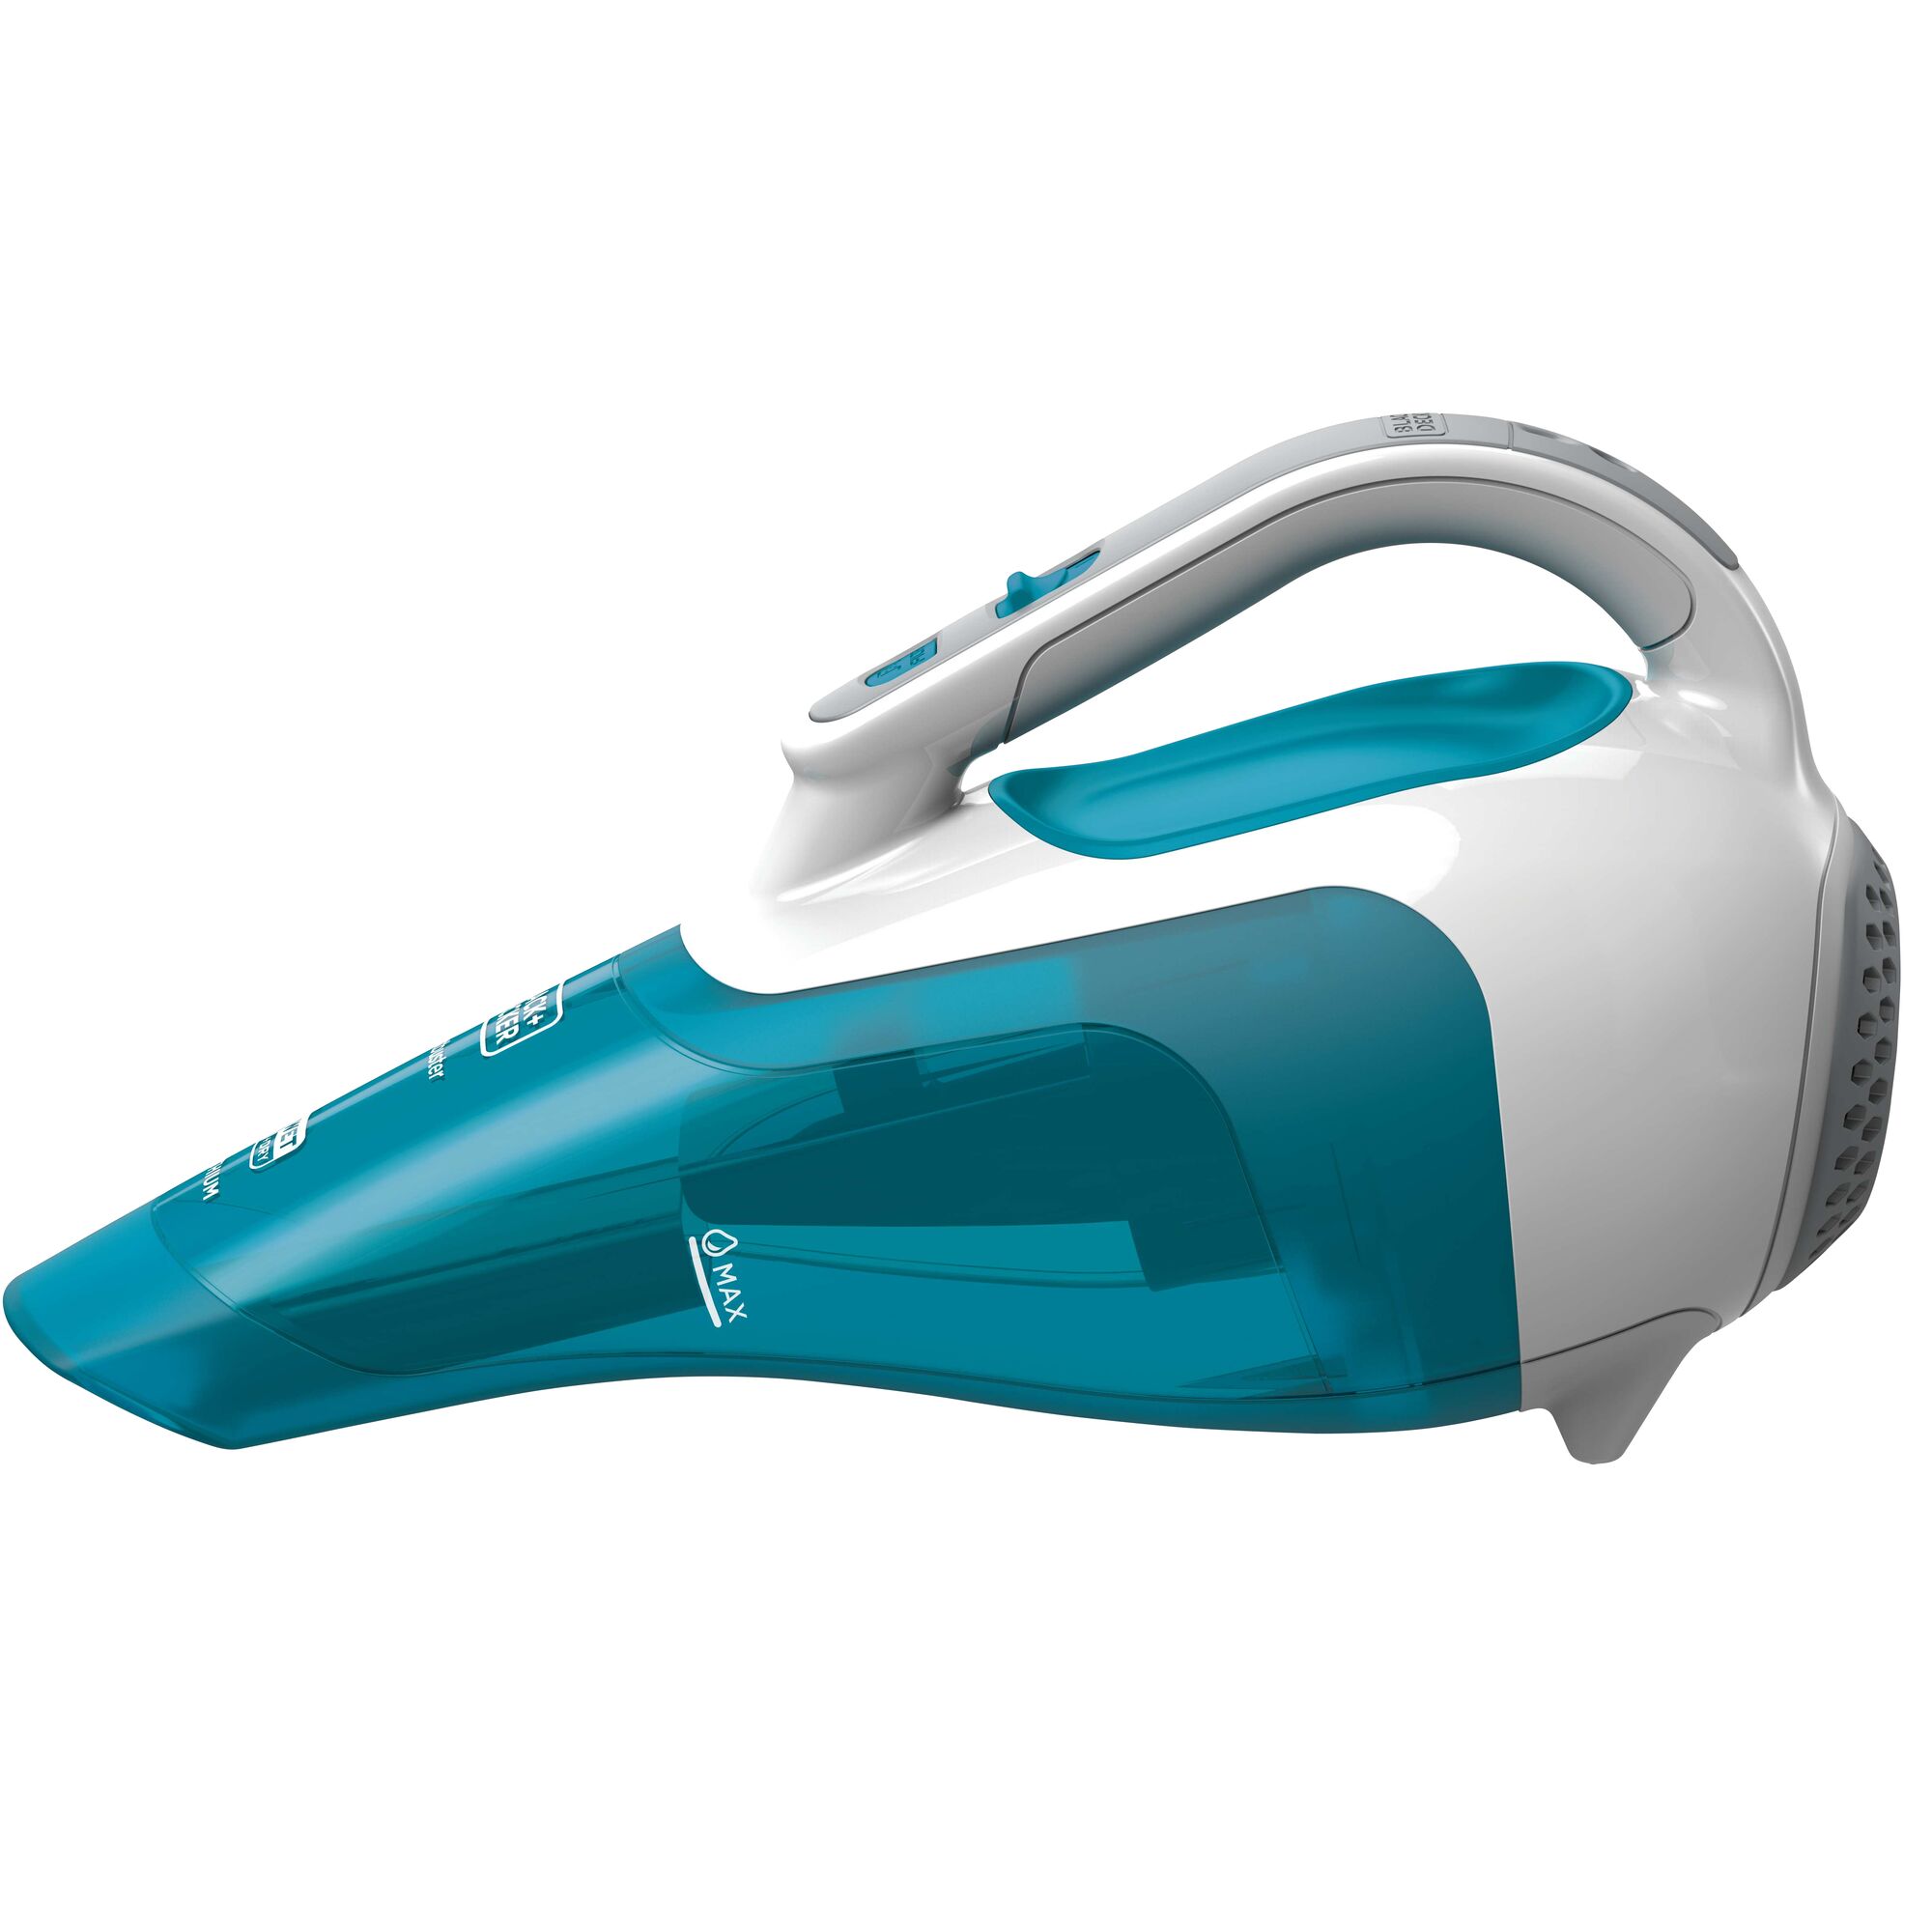 Black and decker Dustbuster lithium wet dry vac